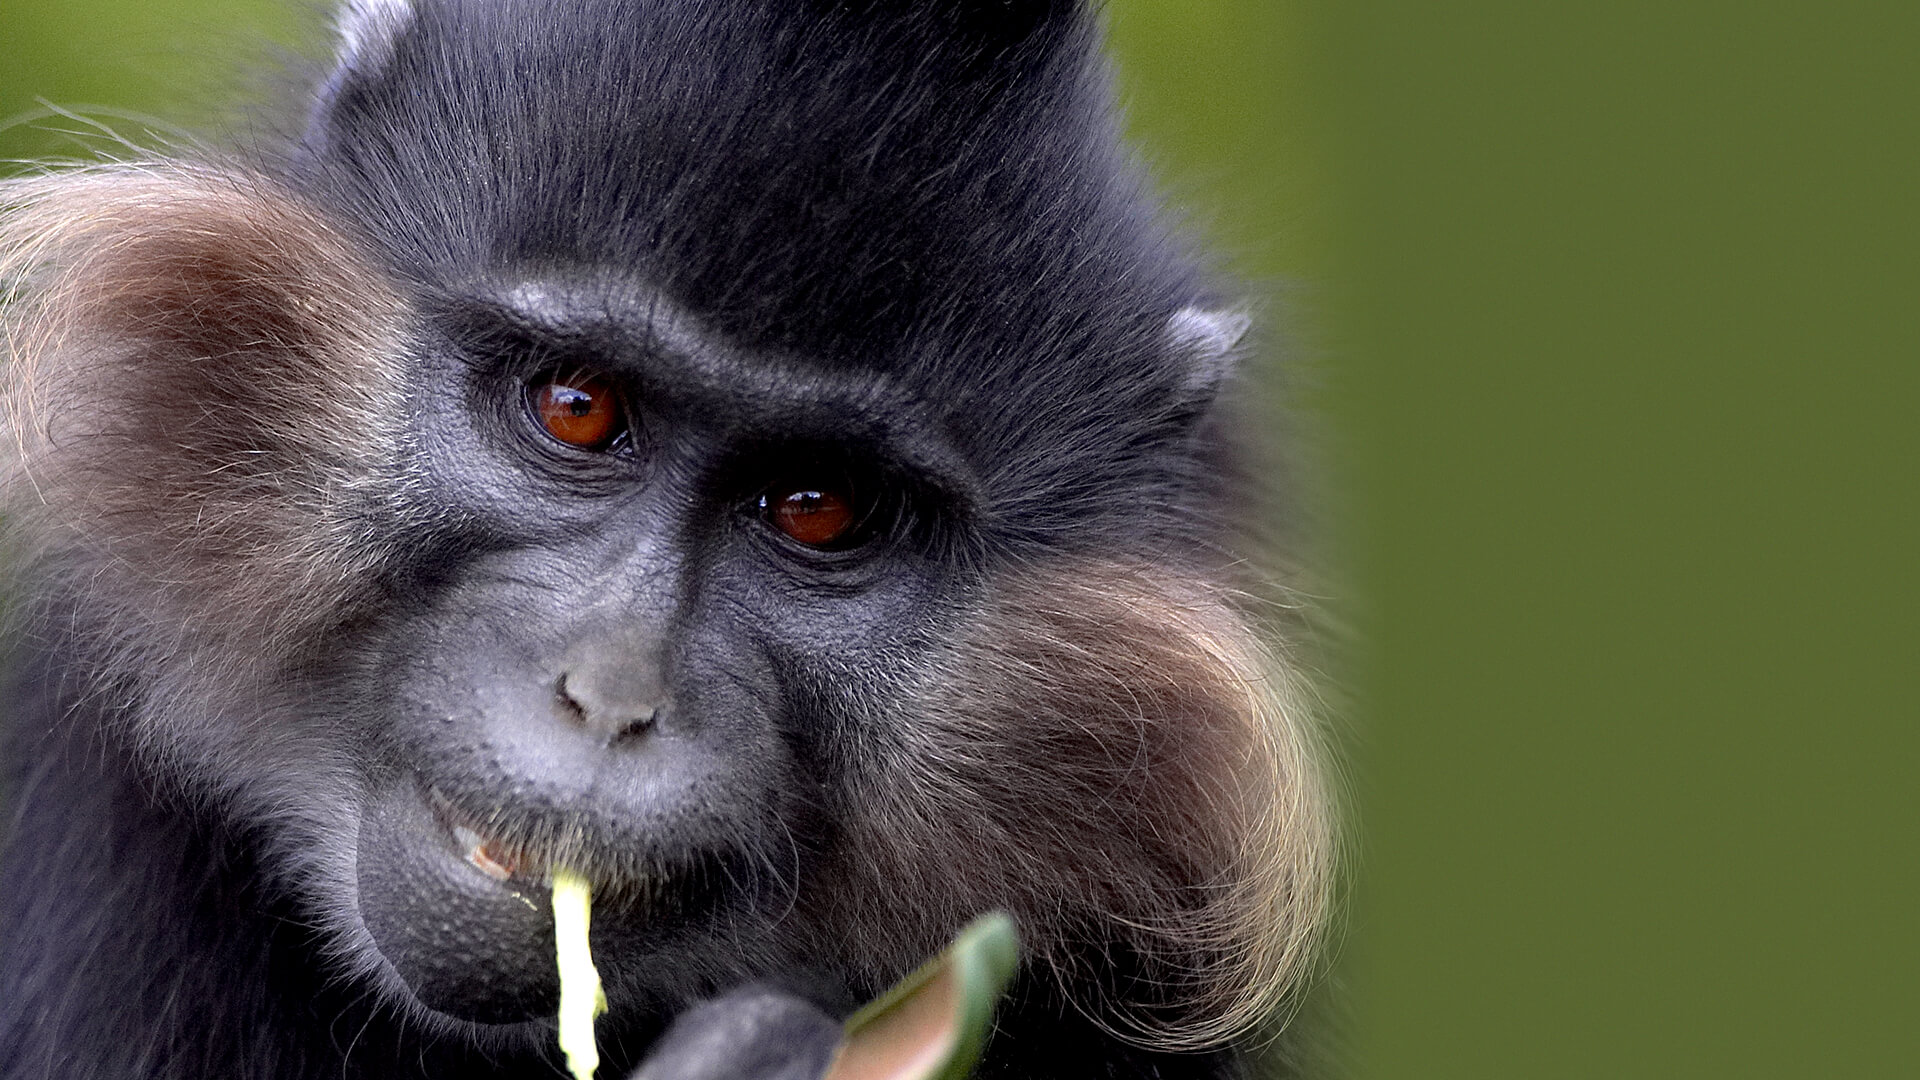 Close up of a mangabey monkey's face as he chews on a piece of food